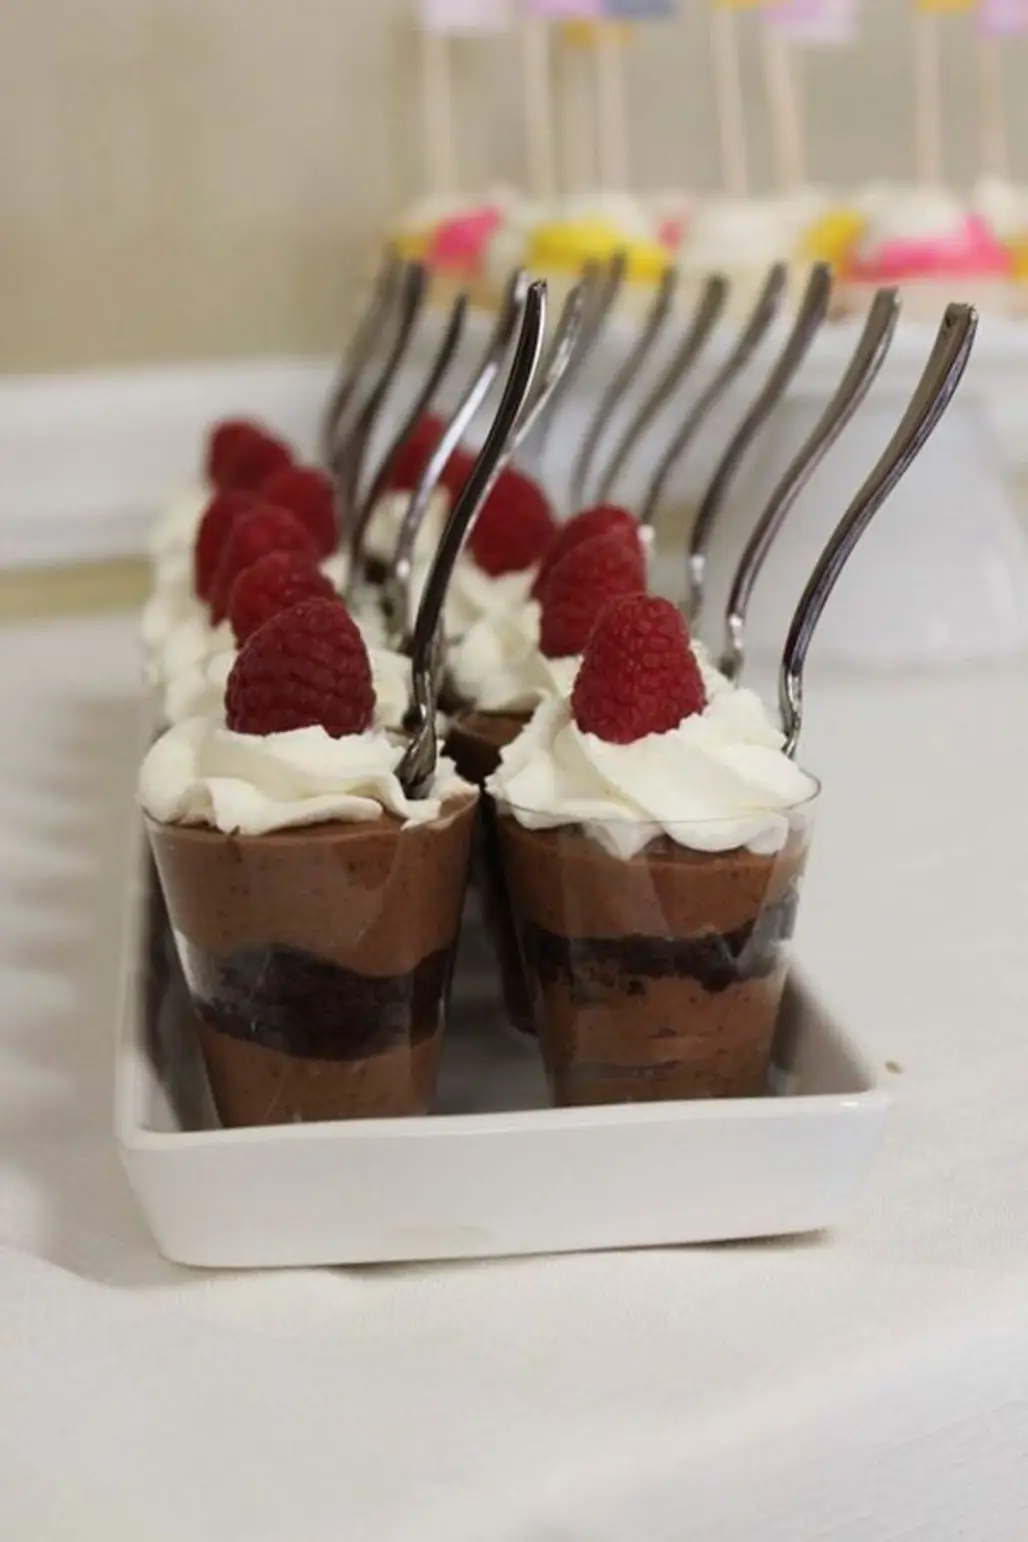 Personal Pudding Cups